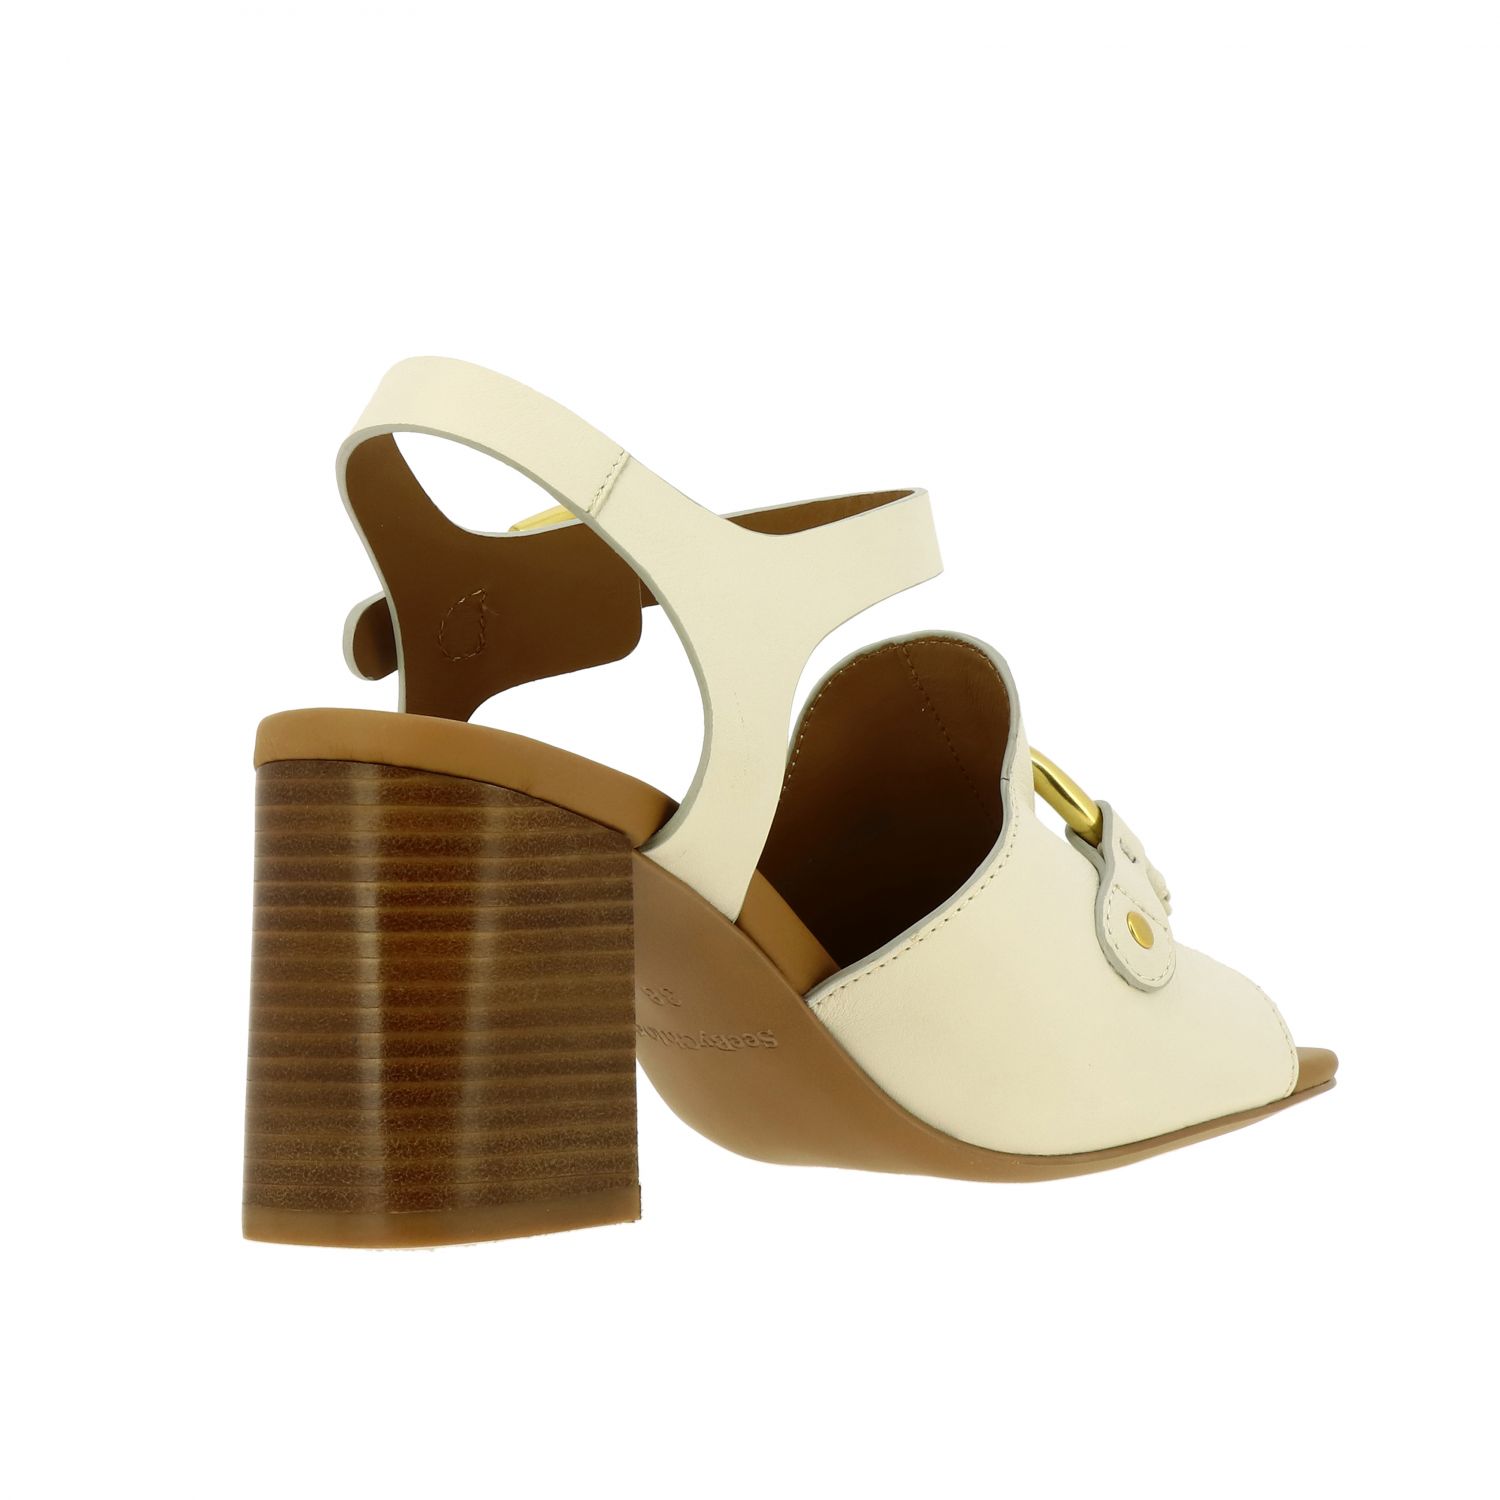 Buy > chaussures see by chloe > in stock